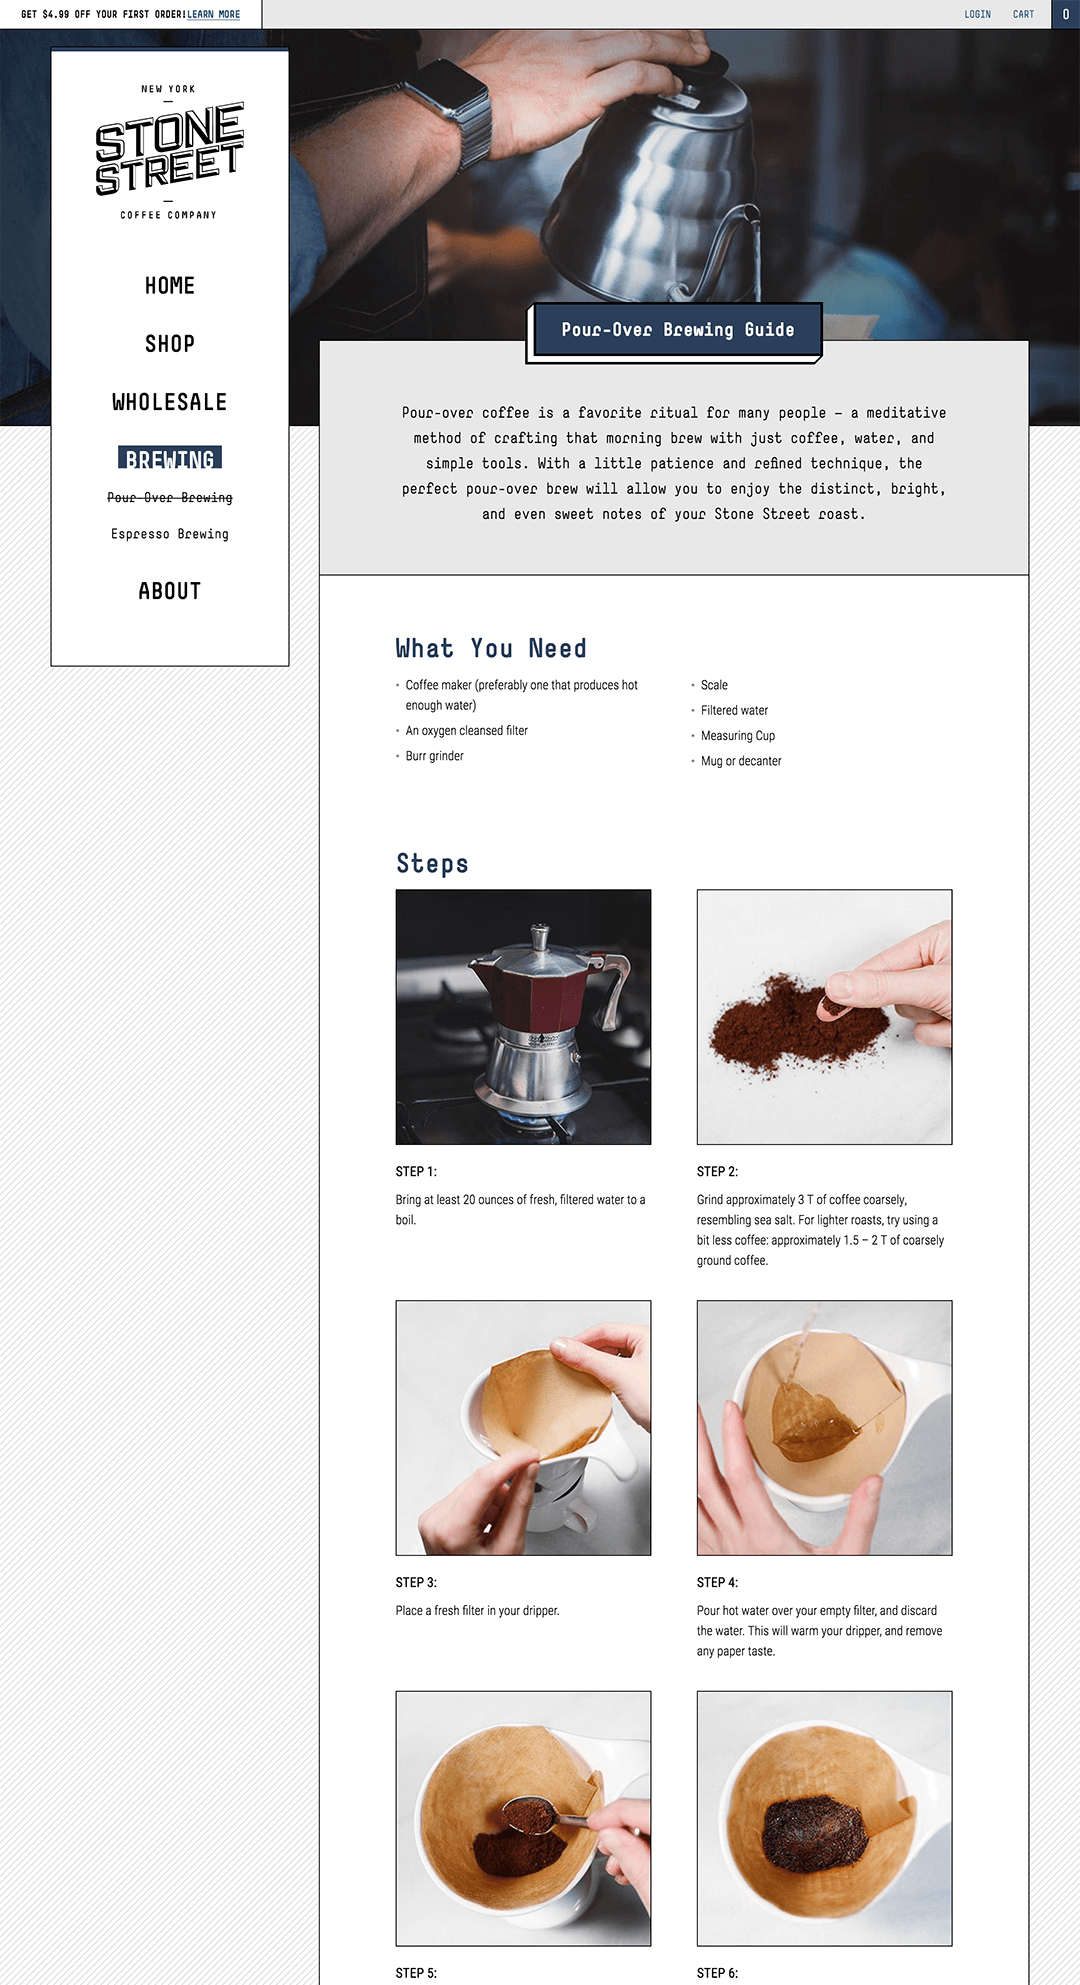 Brewing guide design example